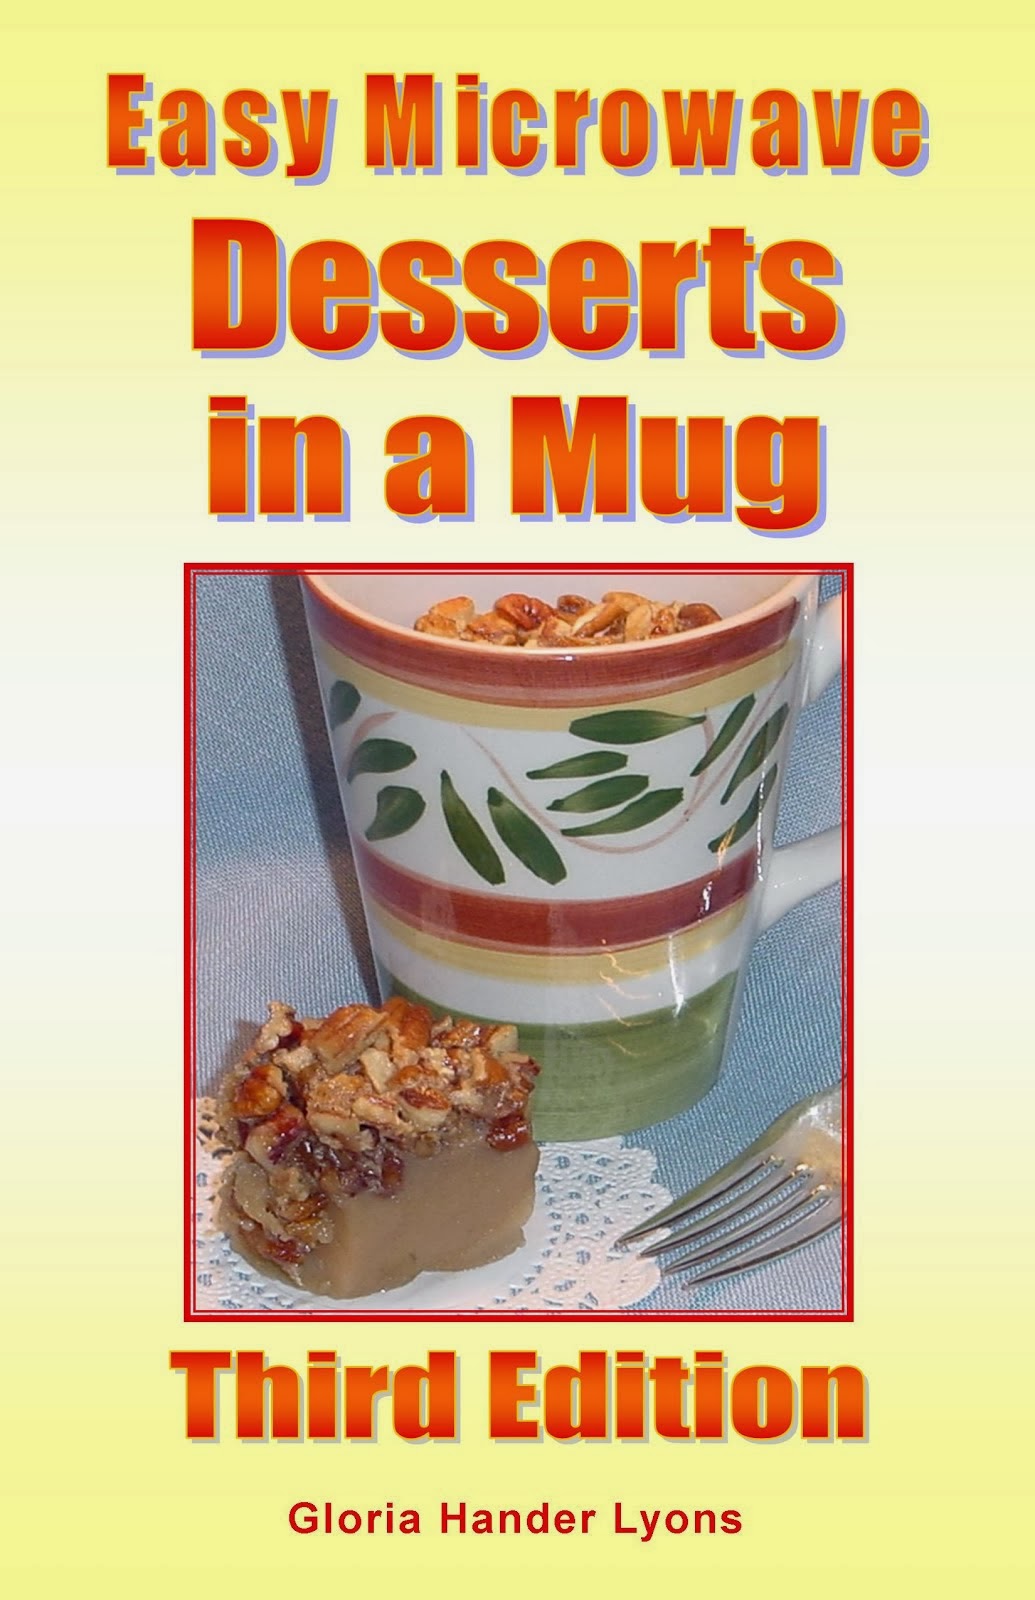 You might also enjoy: Easy Microwave Desserts in a Mug